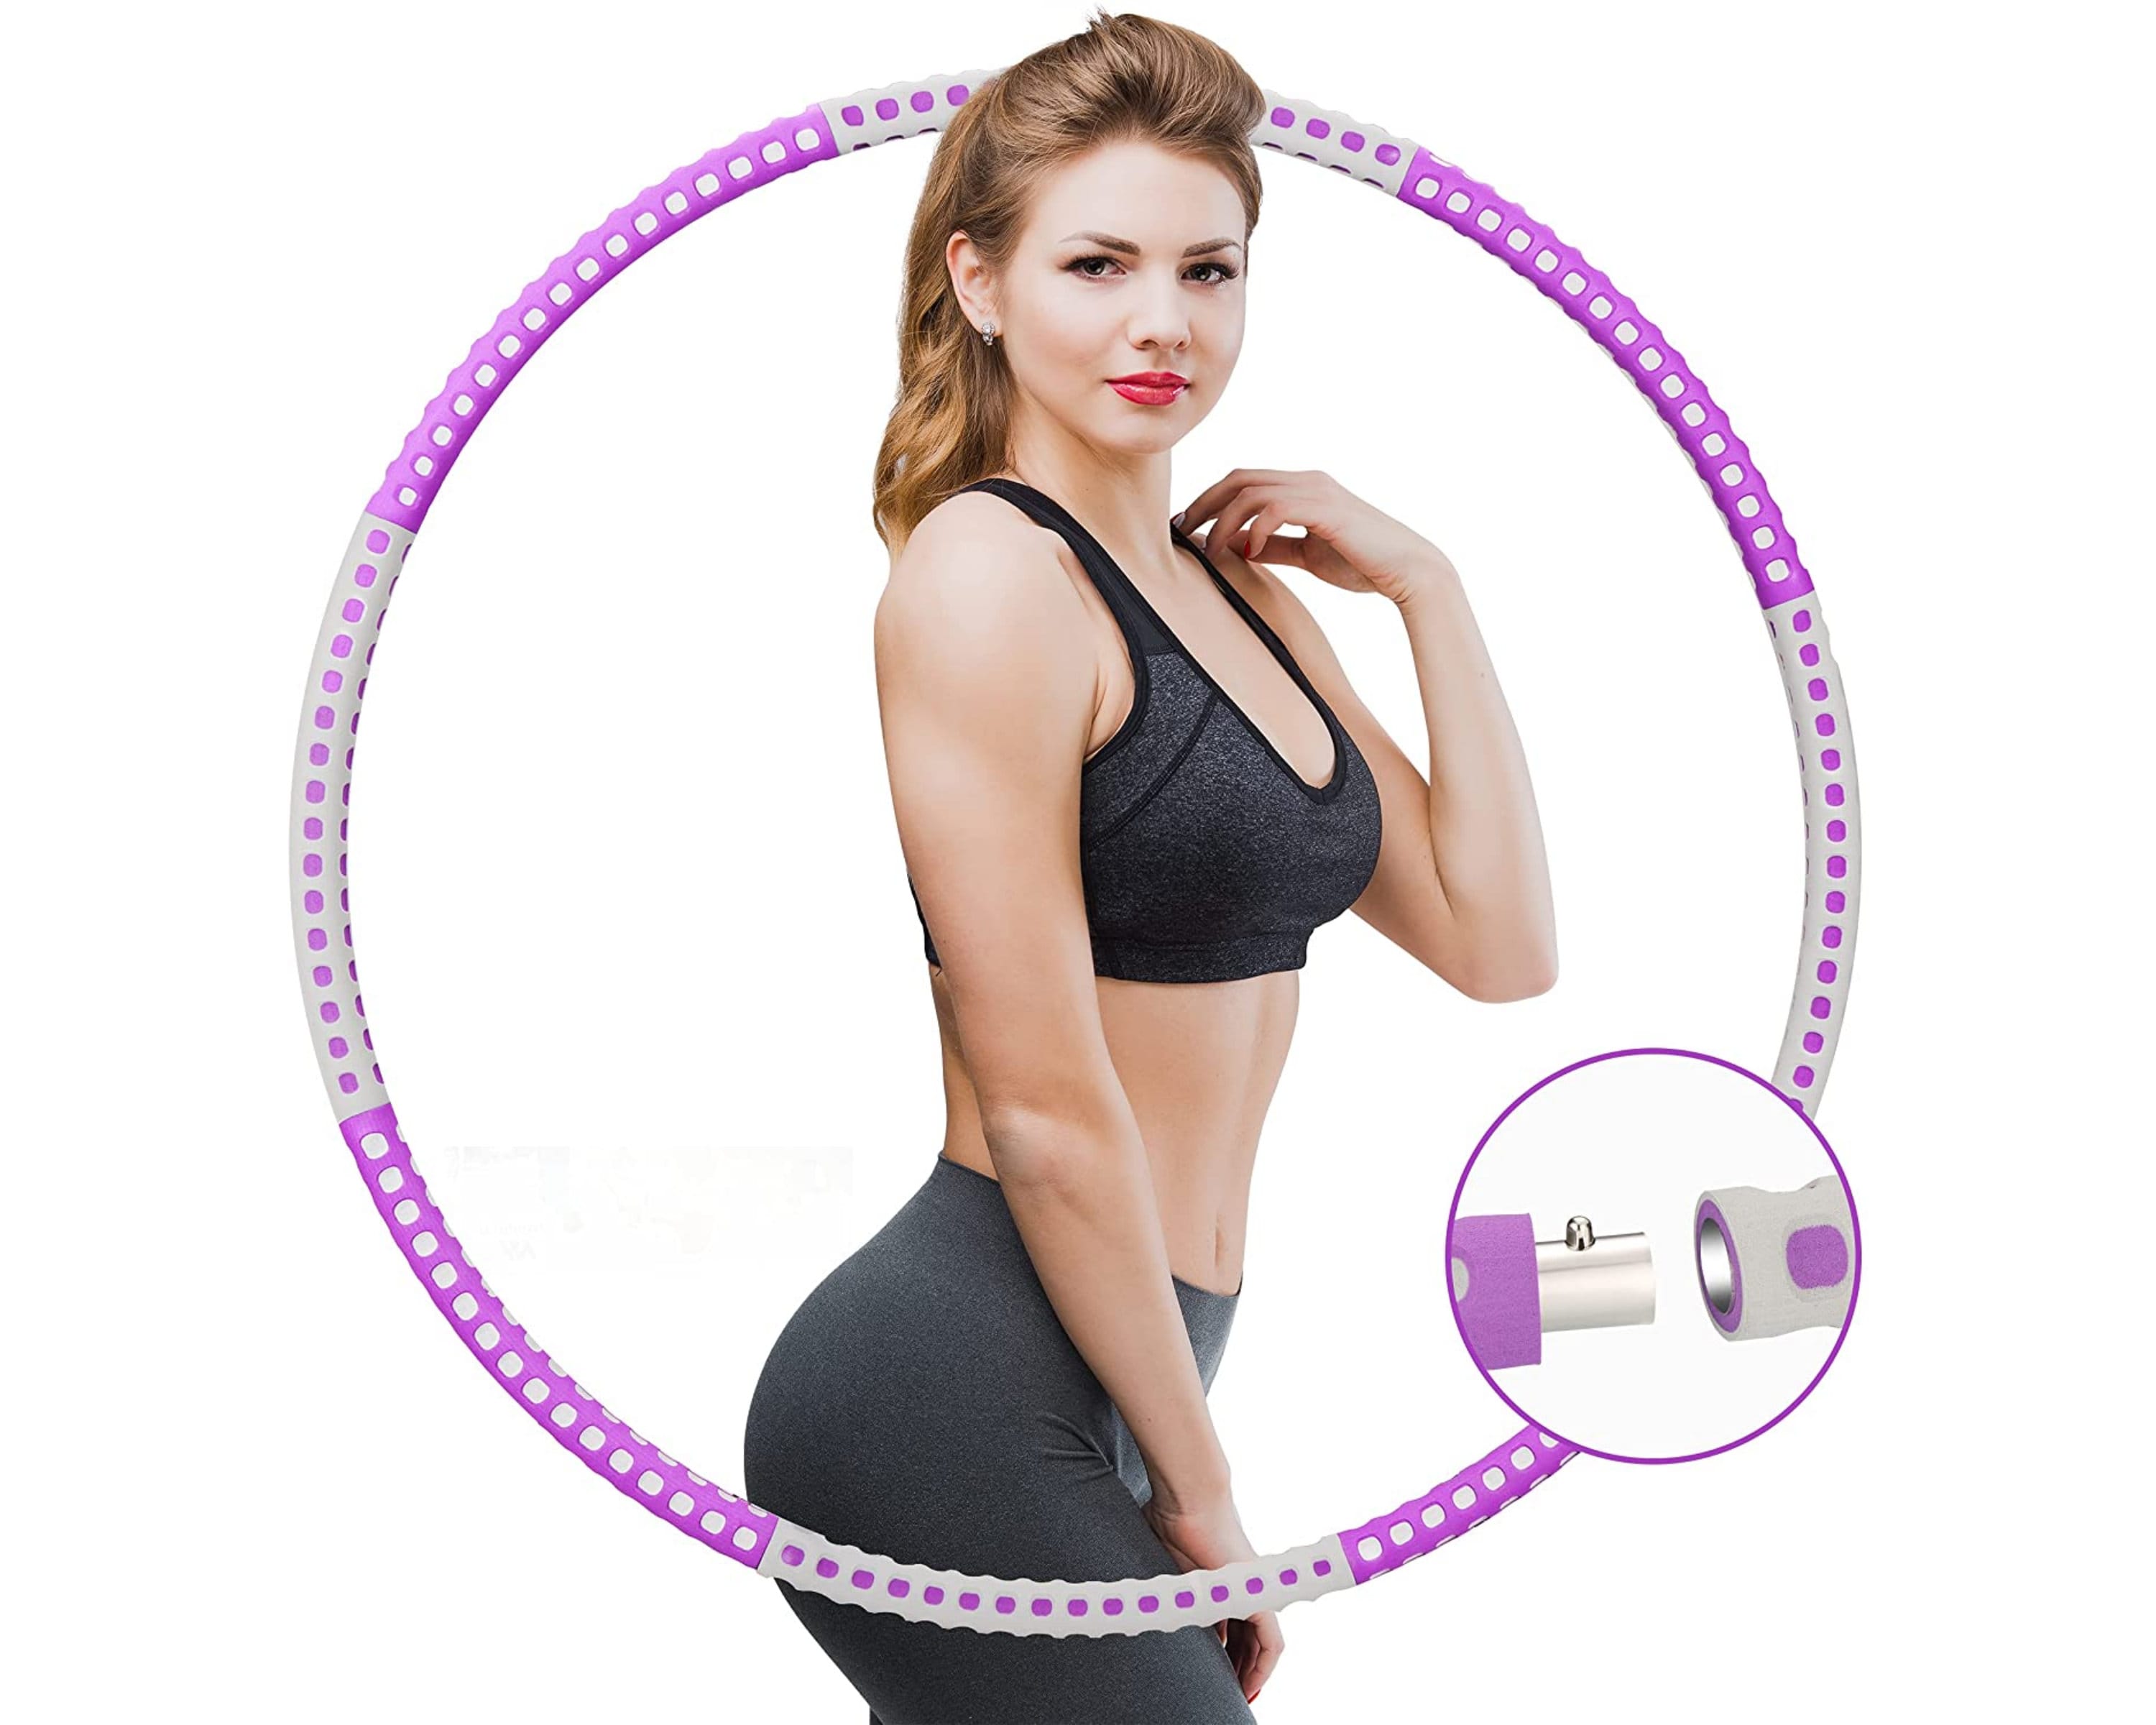 Collapsible Weighted Slimming Hula Hoop, Fitness Padded Abs Exercise Gym  Workout